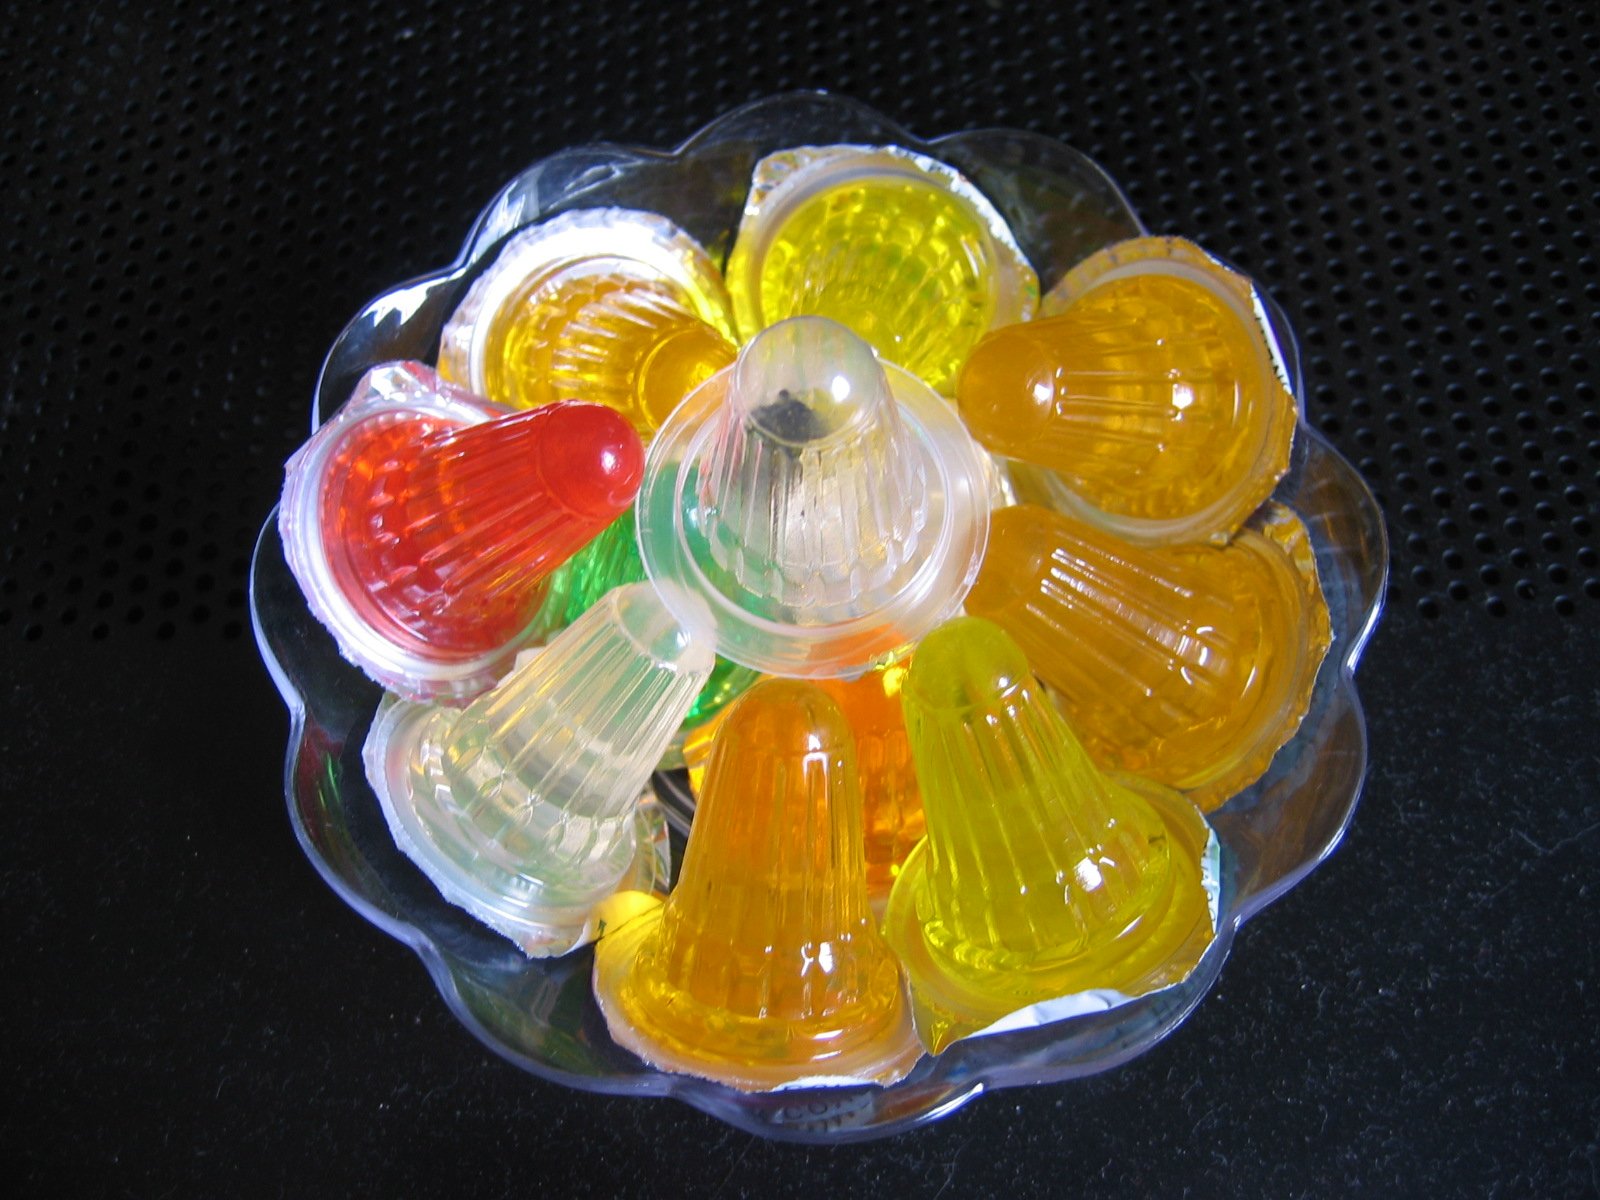 small colorful plastic items placed in a bowl